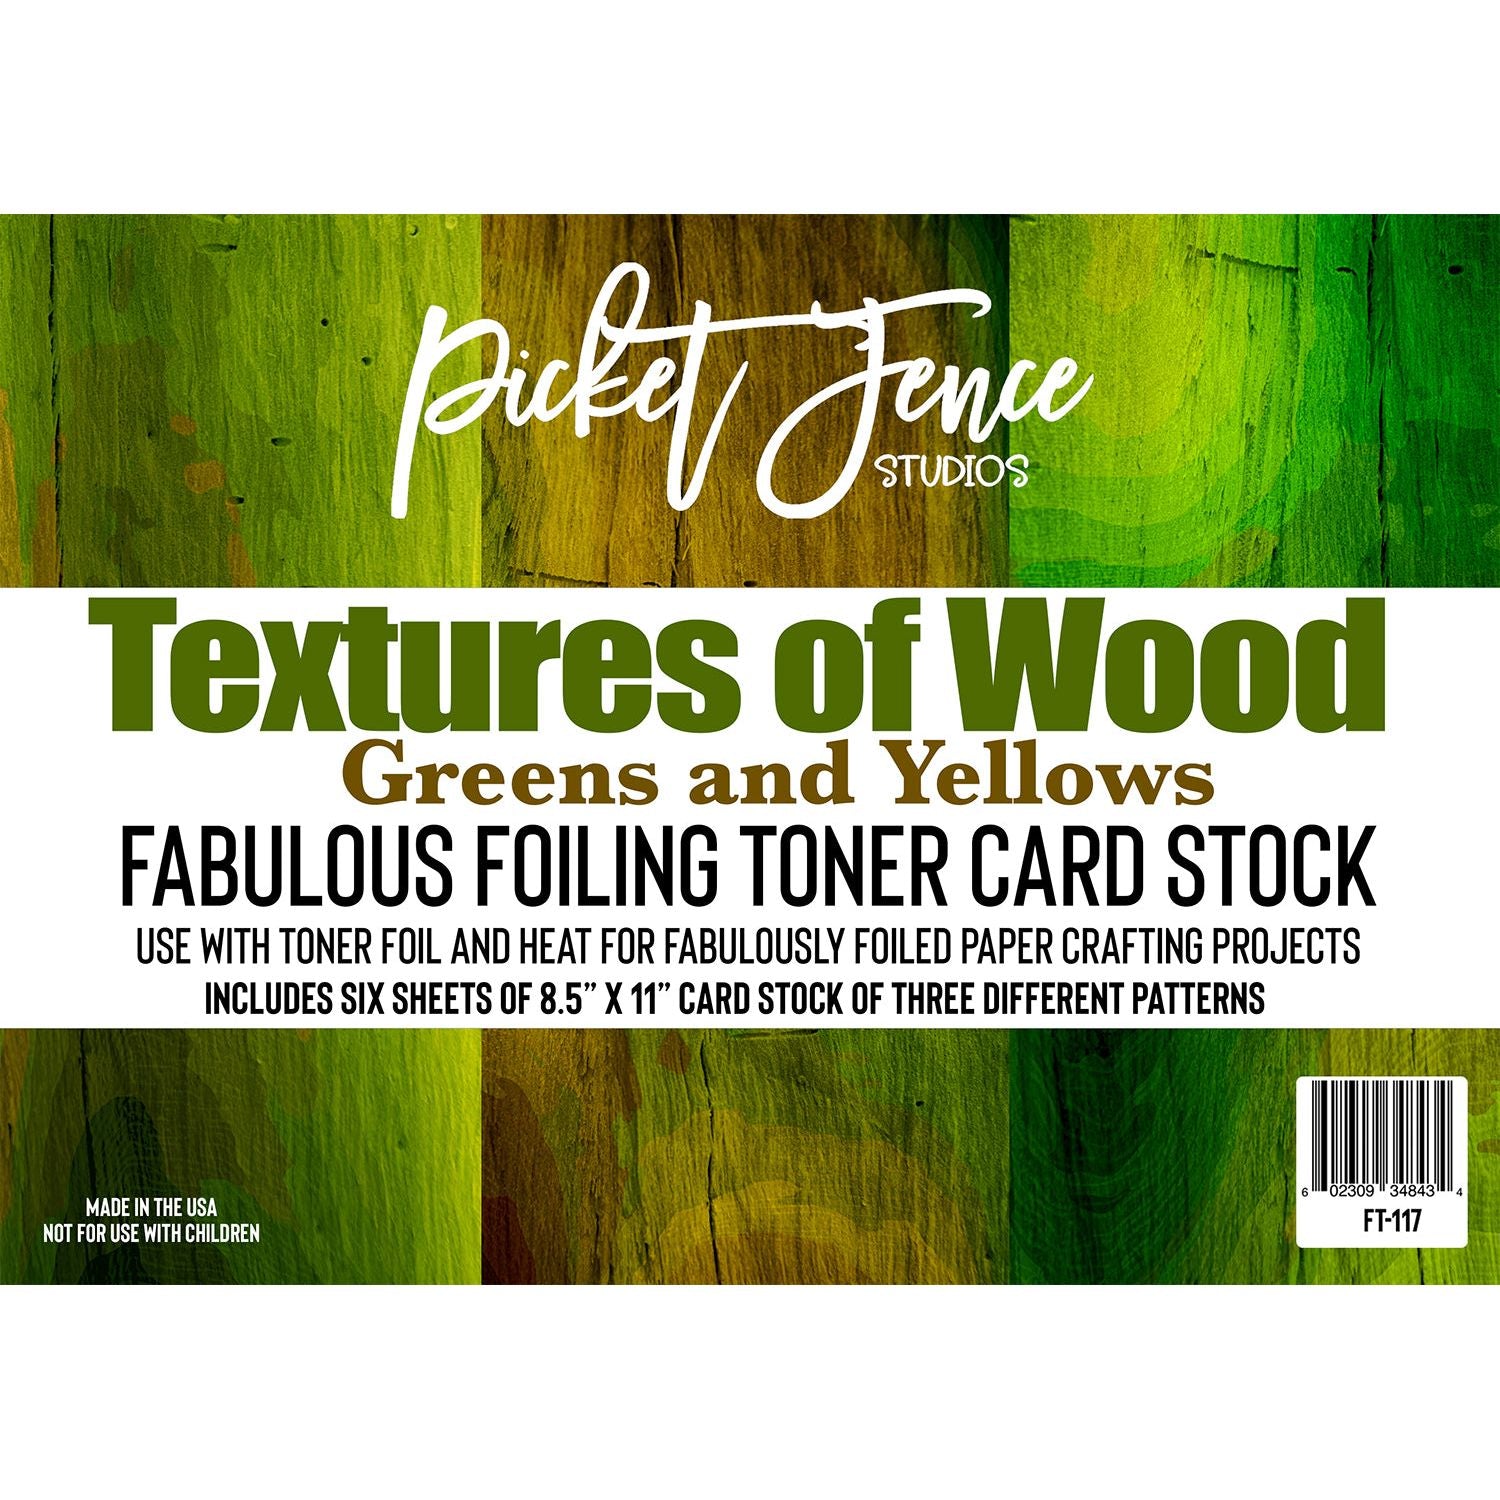 Fabulous Foiling Toner Card Stock - Textures of Wood Greens and Yellows